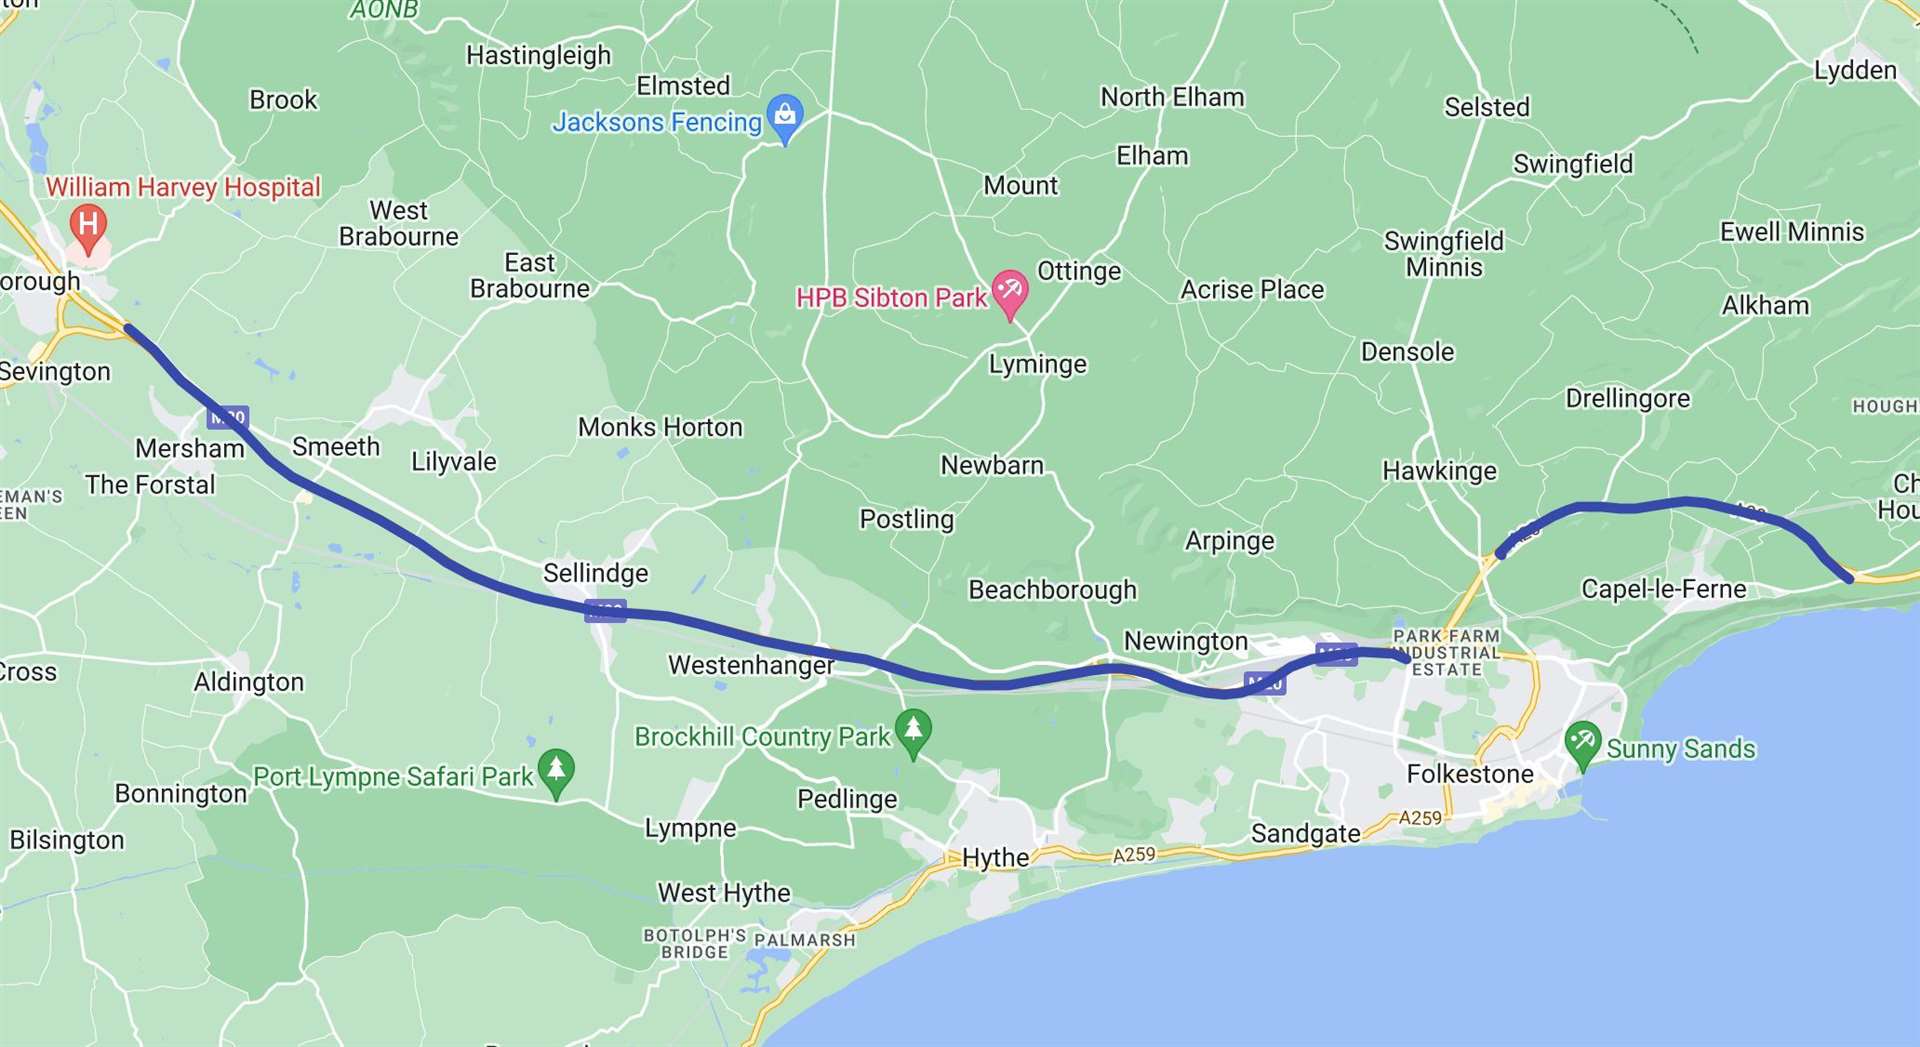 The route the large convoy will take tonight. Picture: Google